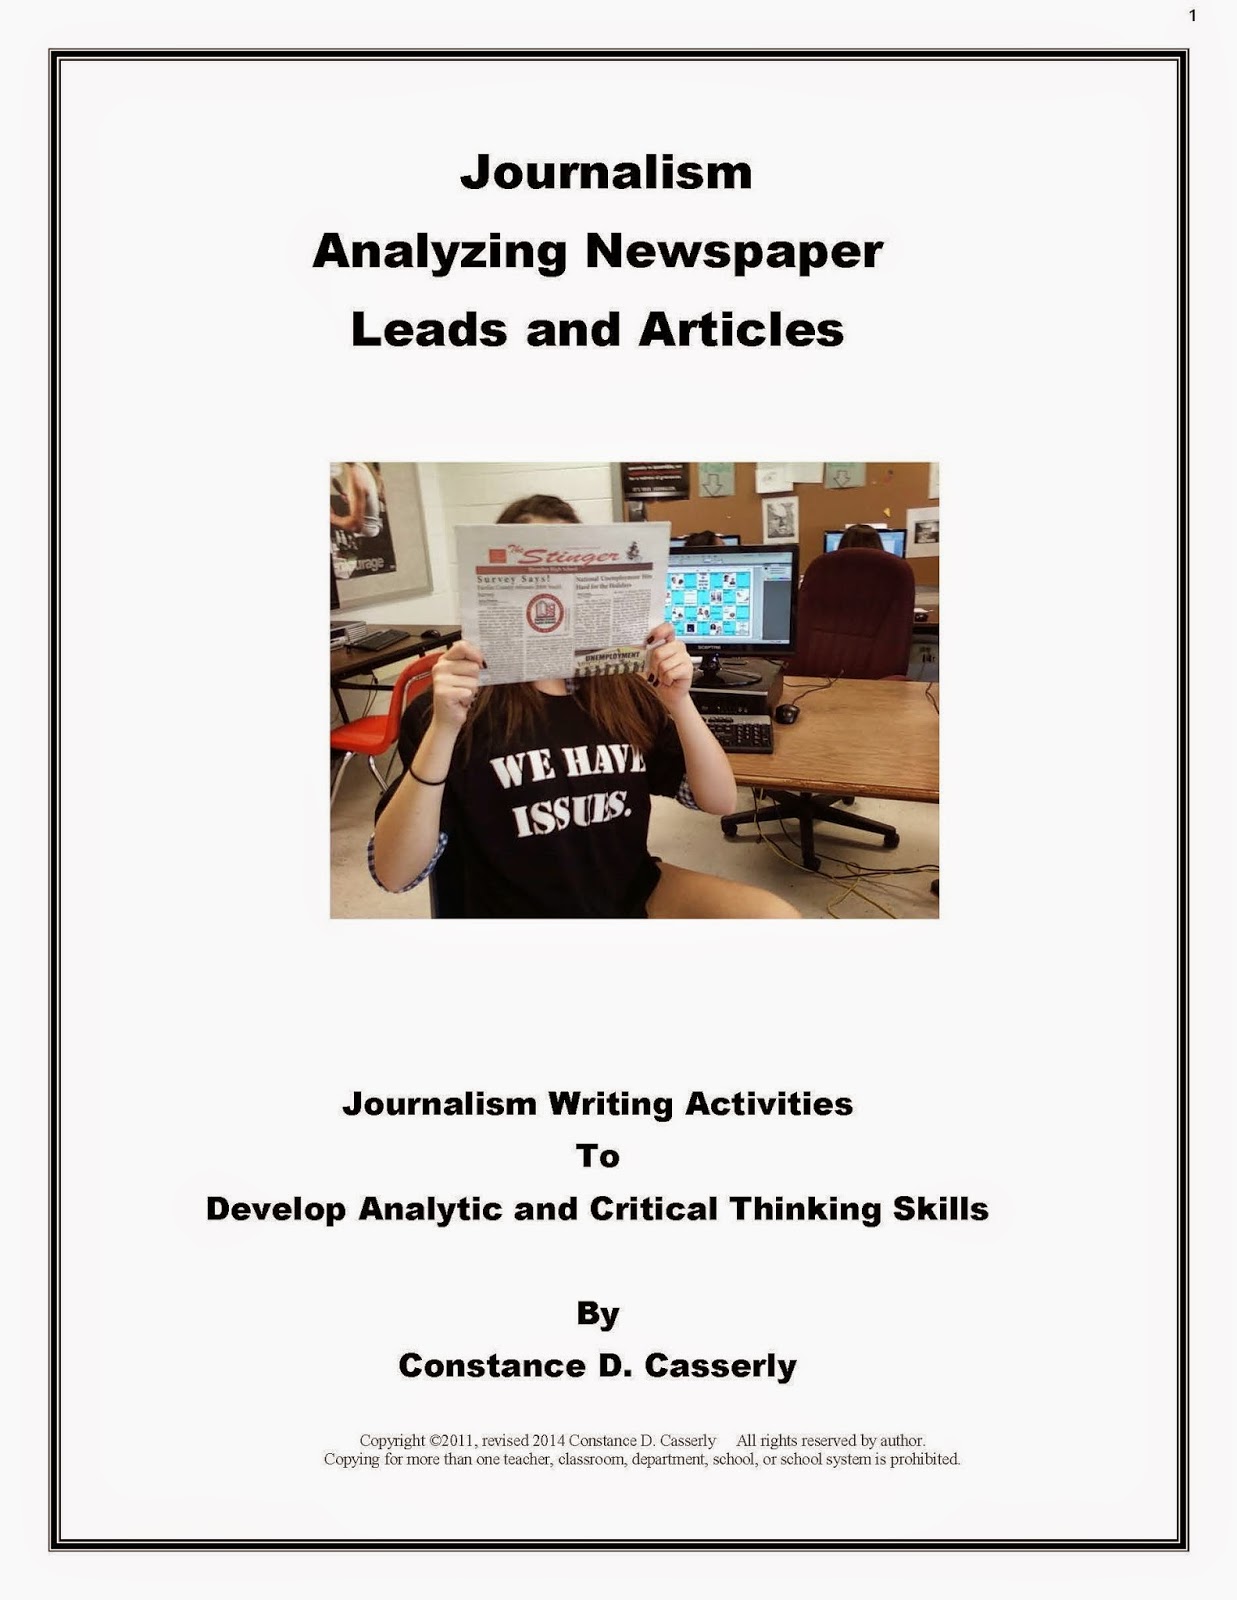 Analyzing Newspaper Leads and Articles Activities